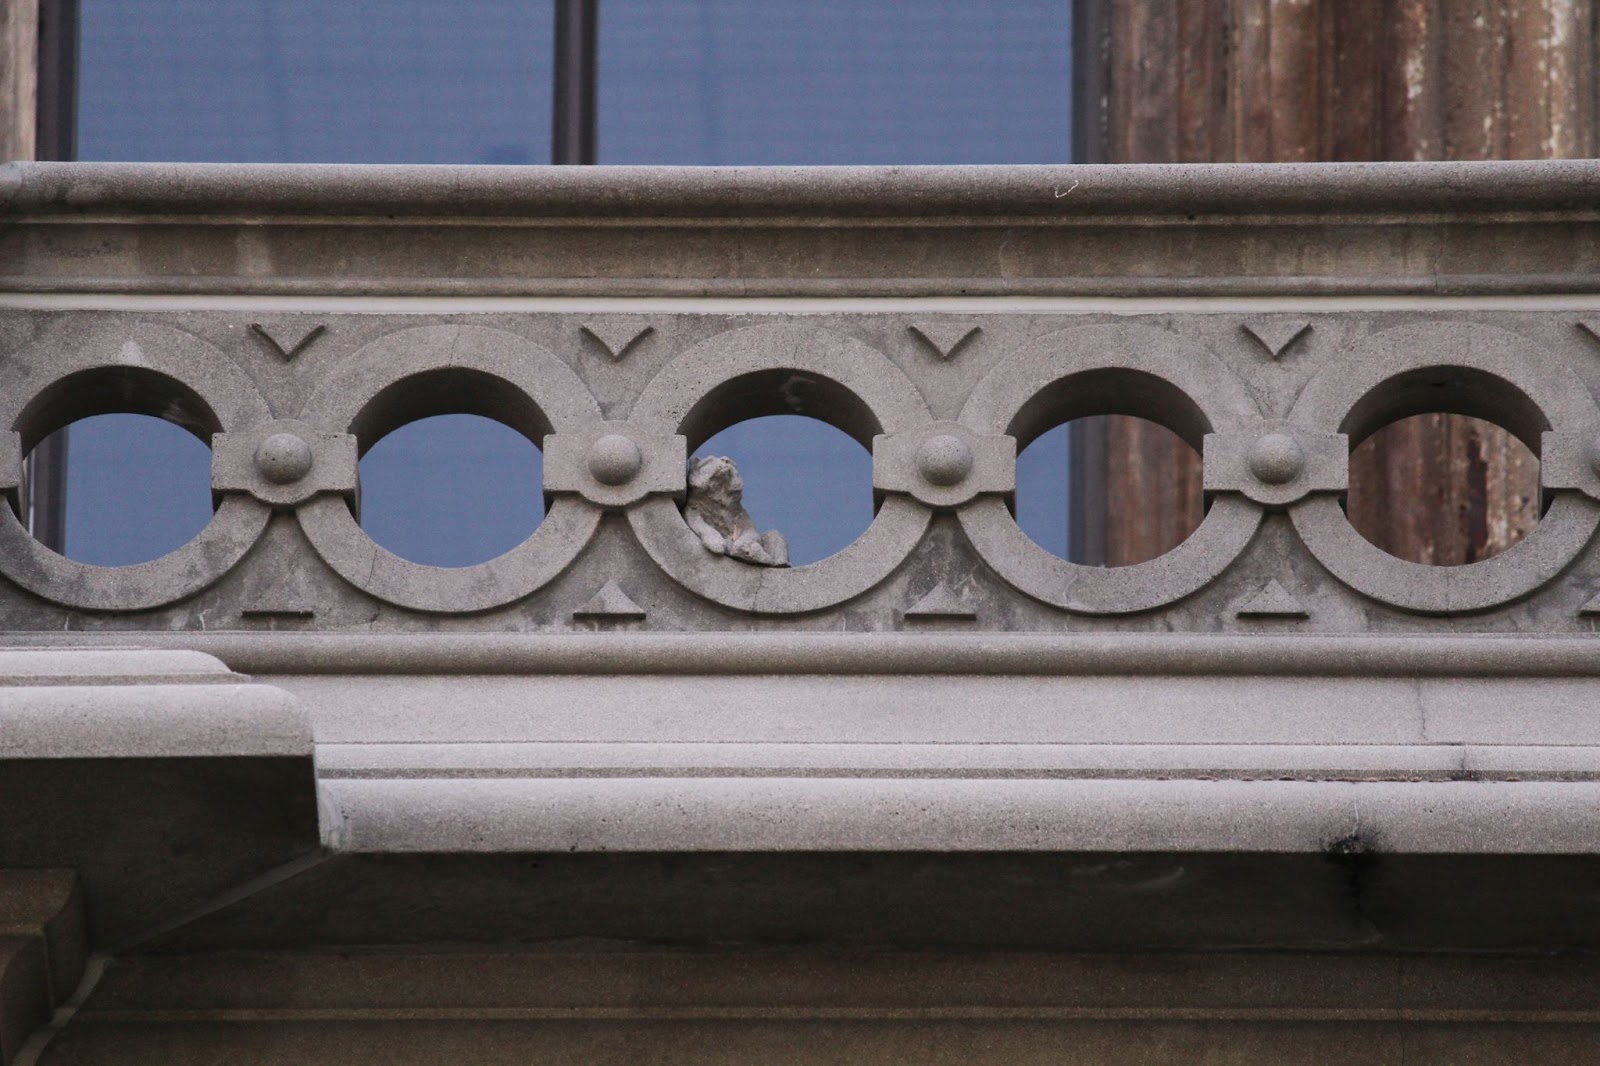 A zoomed in image of the balcony railings, where the smallest bear is visible in one of the rungs. 